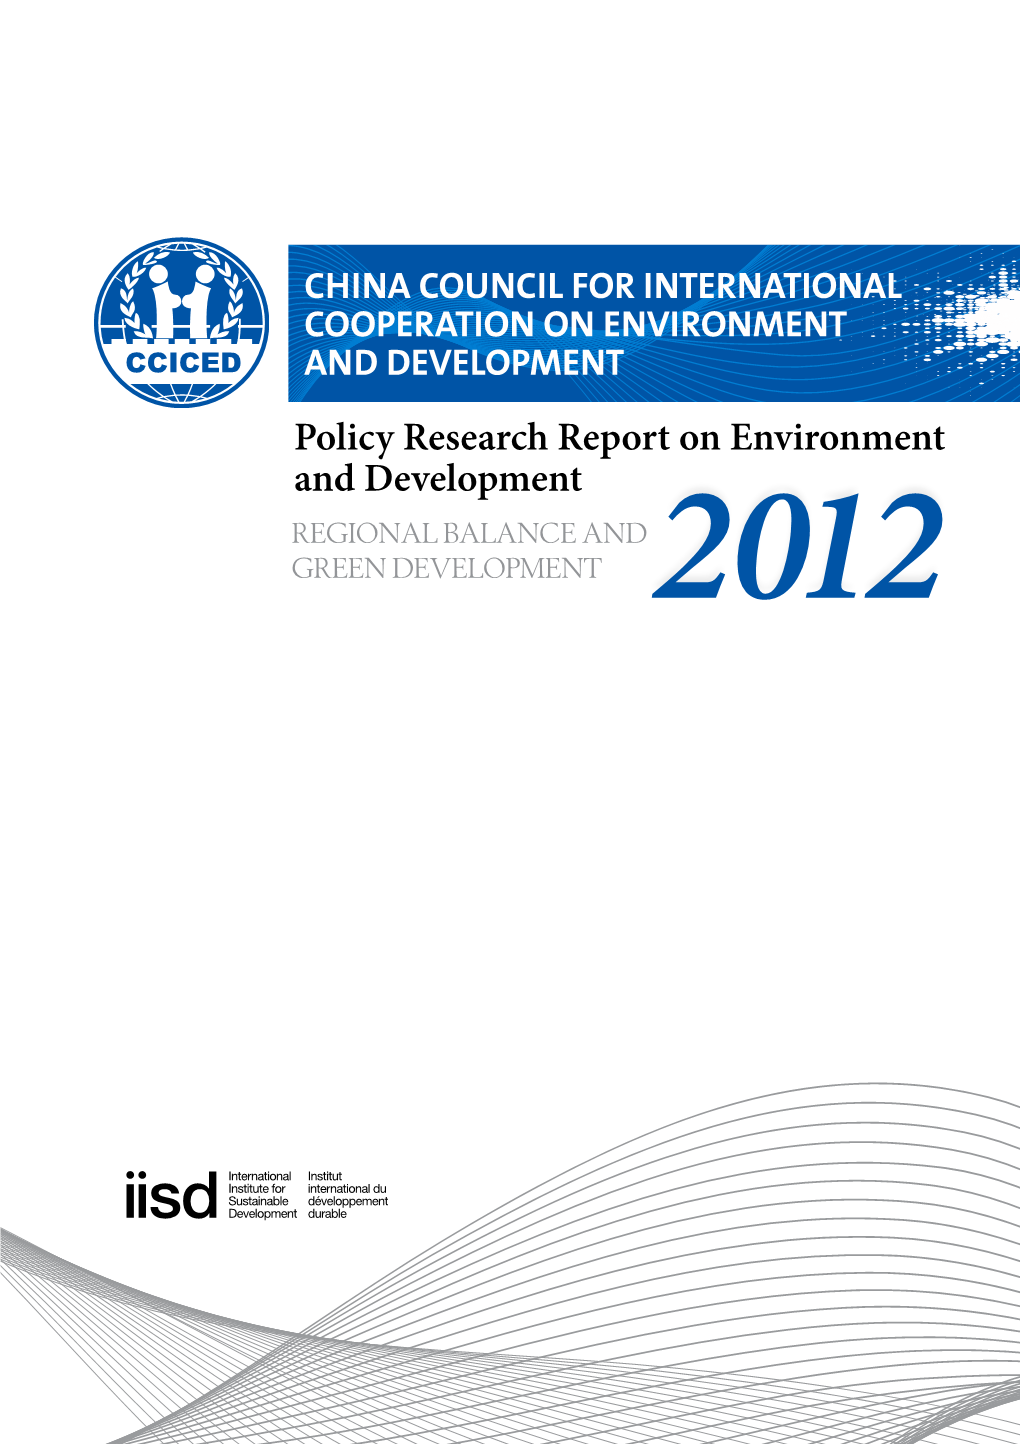 Policy Research Report on Environment and Development